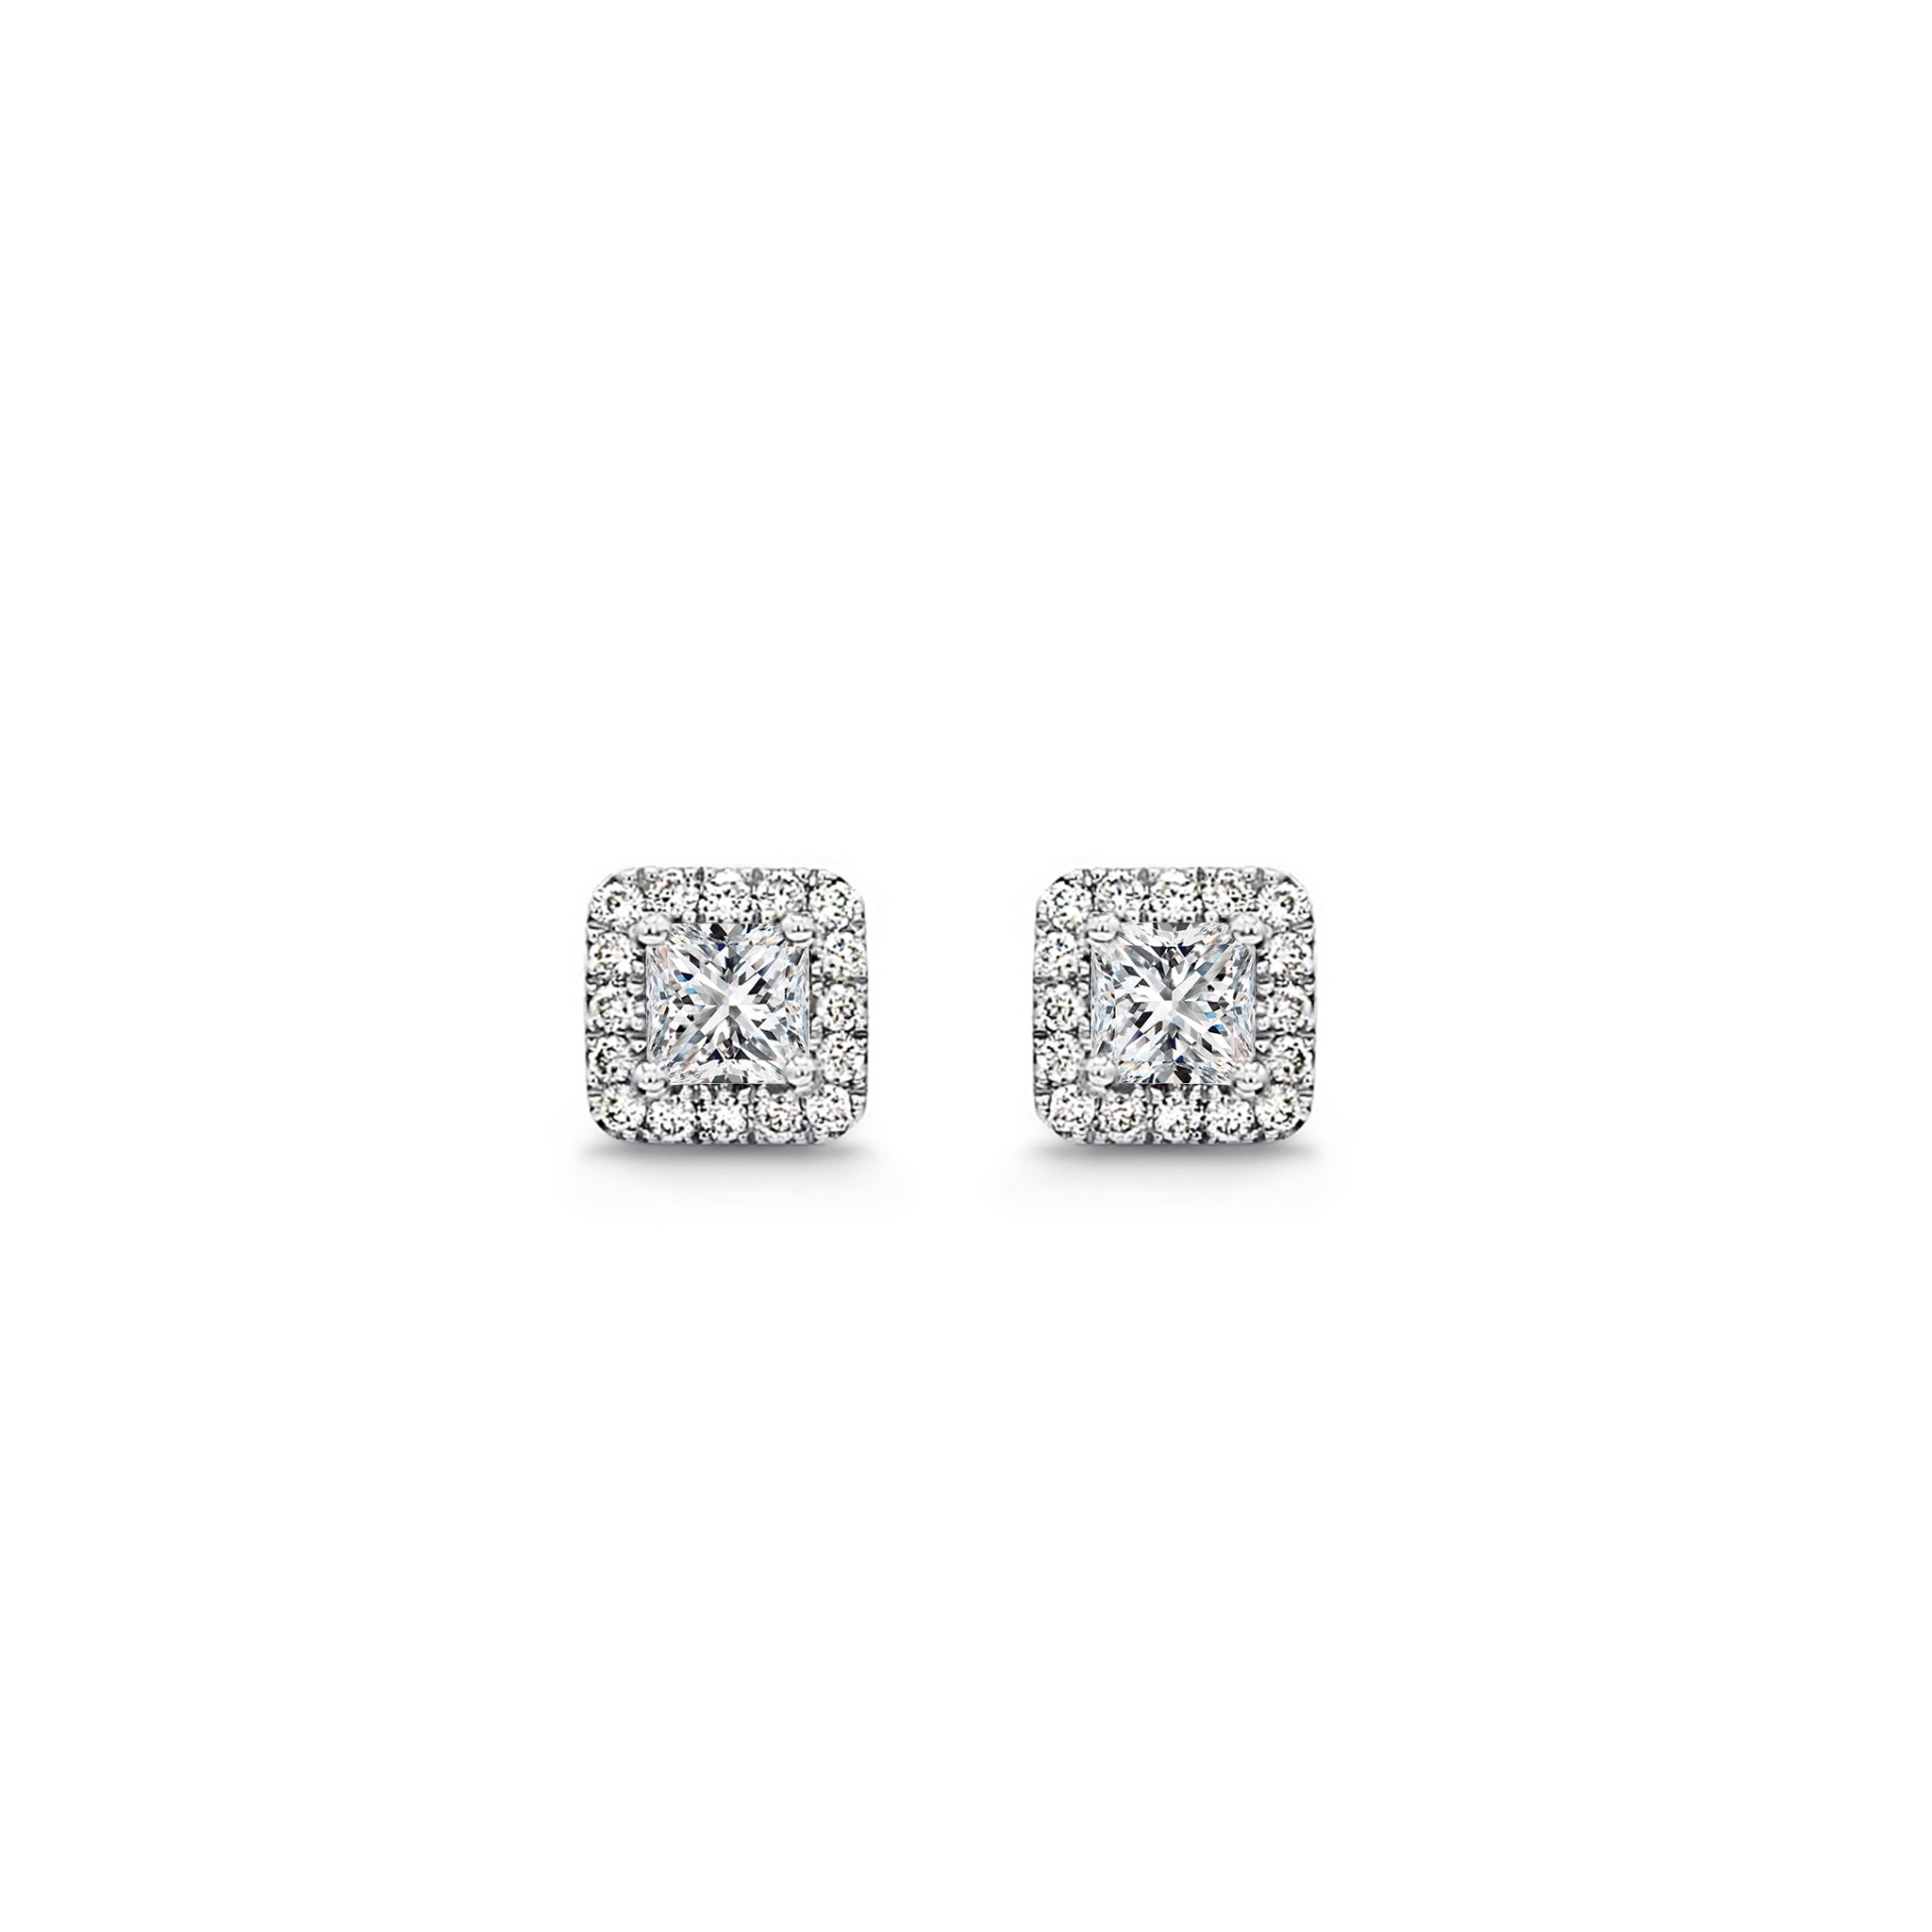 Shimansky - My Girl Diamond Halo Earrings 0.40 Carat Crafted in Platinum Front View